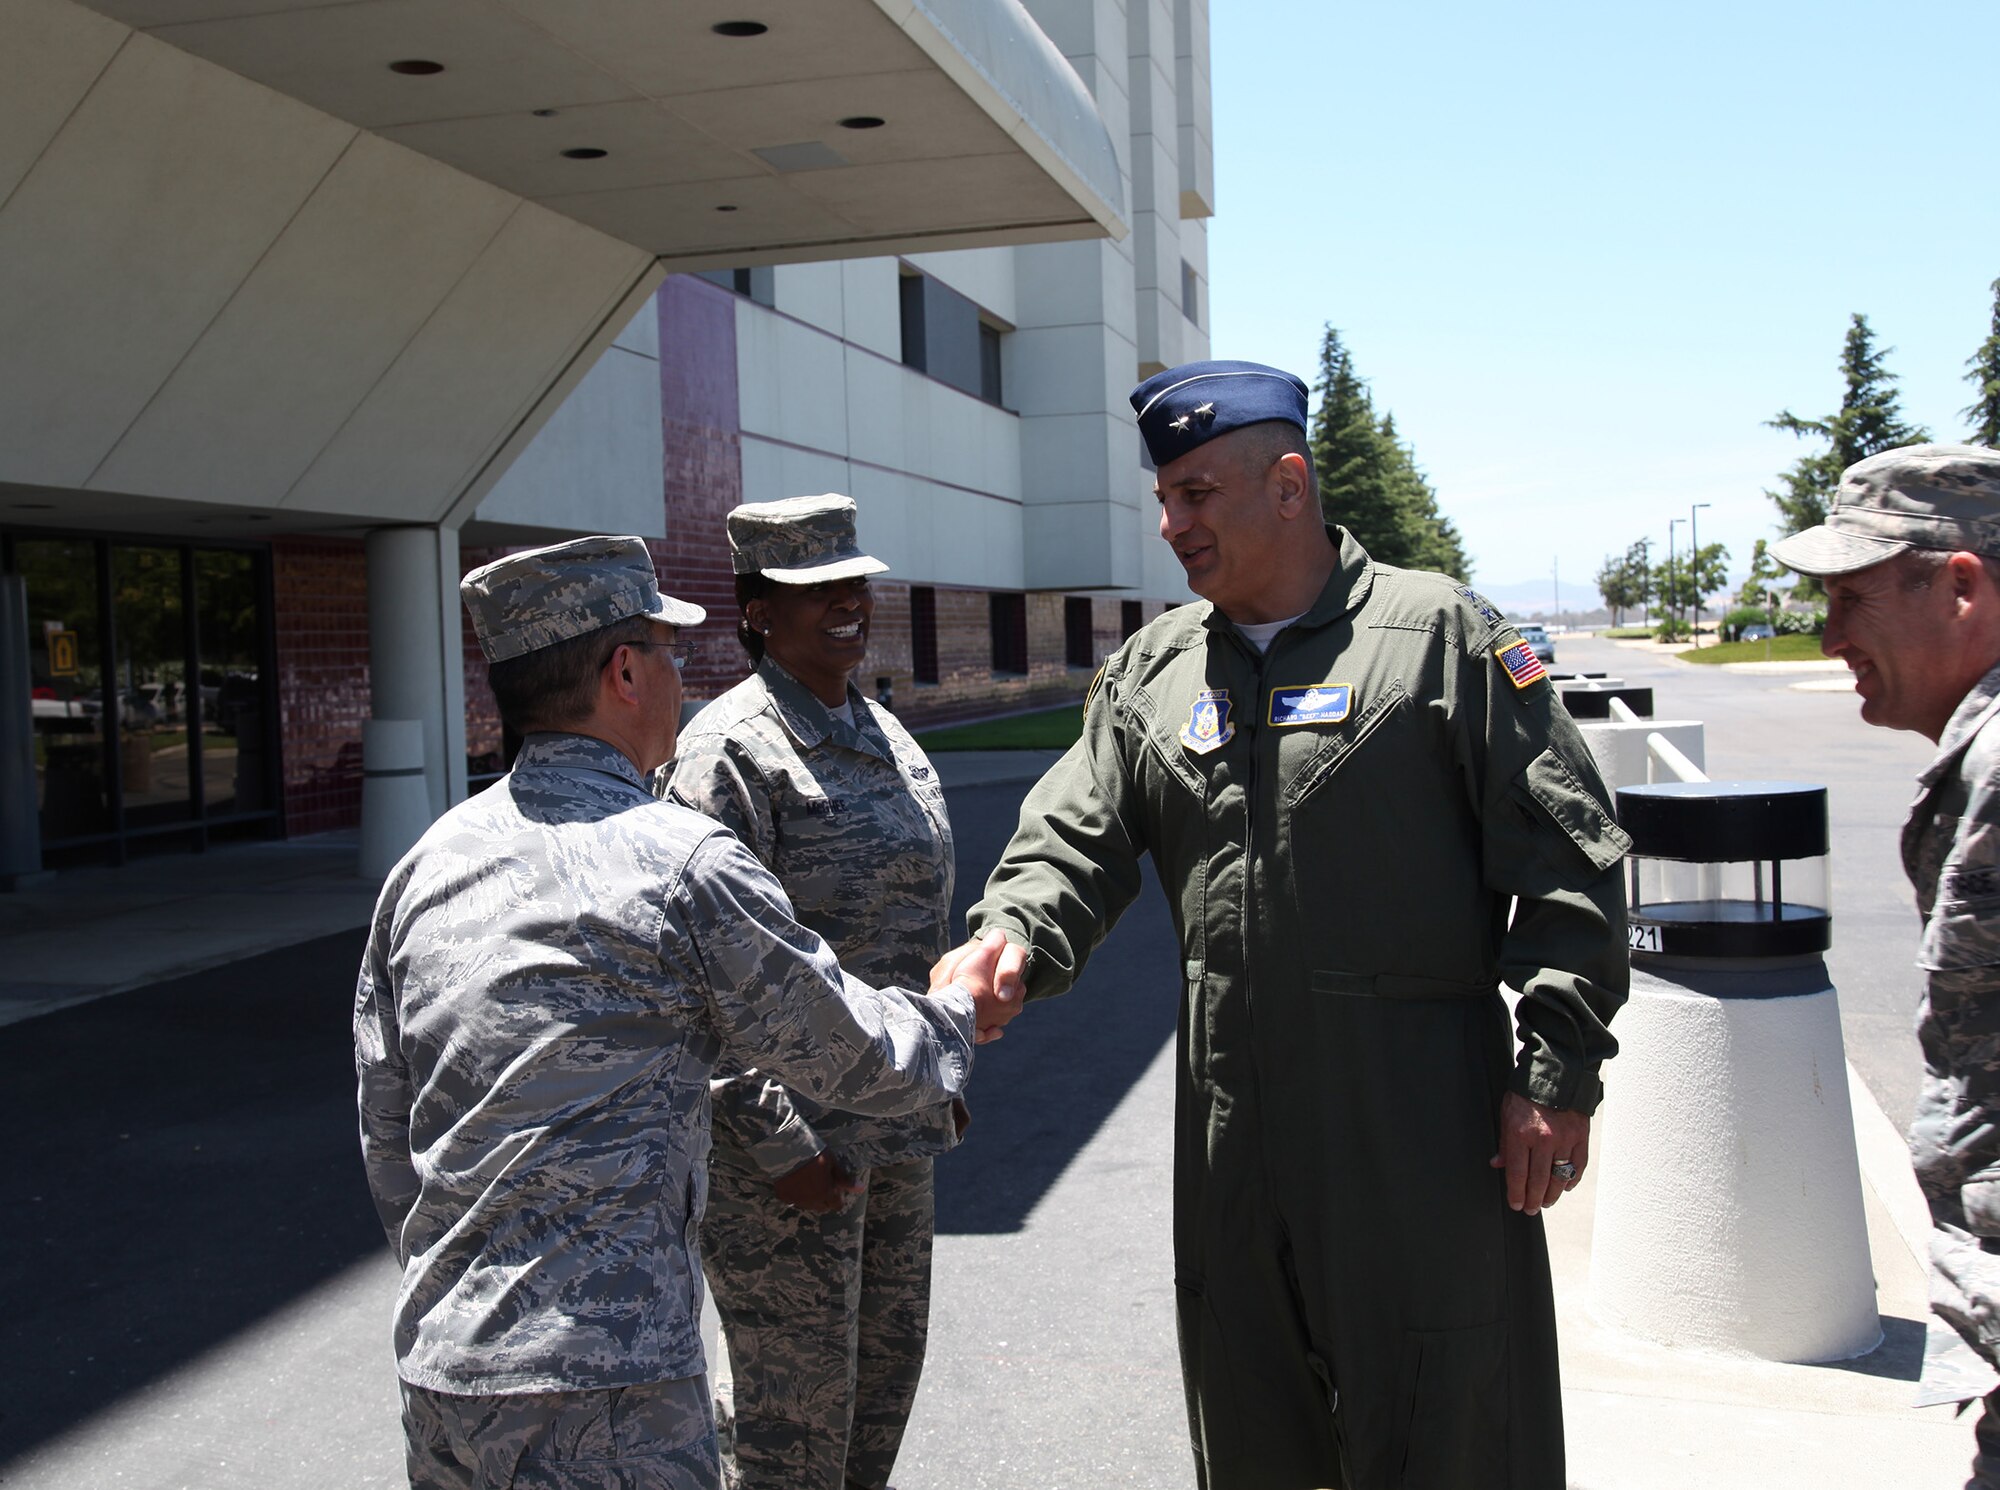 TRAVIS AIR FORCE BASE, Calif. --Leaders of the 349th Aerospace Medicine Squadron welcome Maj. Gen. Richard S. "Beef" Haddad, Vice Commander of the Air Force Reserve Command, to David Grant USAF Medical Center, Travis Air Force Base, Calif., June 21, 2014. From left: Col. Kenneth Furukawa, 349th AMDS commander; and Senior Master Sgt. Helena McGhee, 349th AMDS Senior Air Reserve Technician. The general visited facilities and met with Airman to see air mobility innovations helping Travis AFB personnel deliver America's hope and might around the globe. (U.S. Air Force photo/Lt. Col. Robert Couse-Baker)